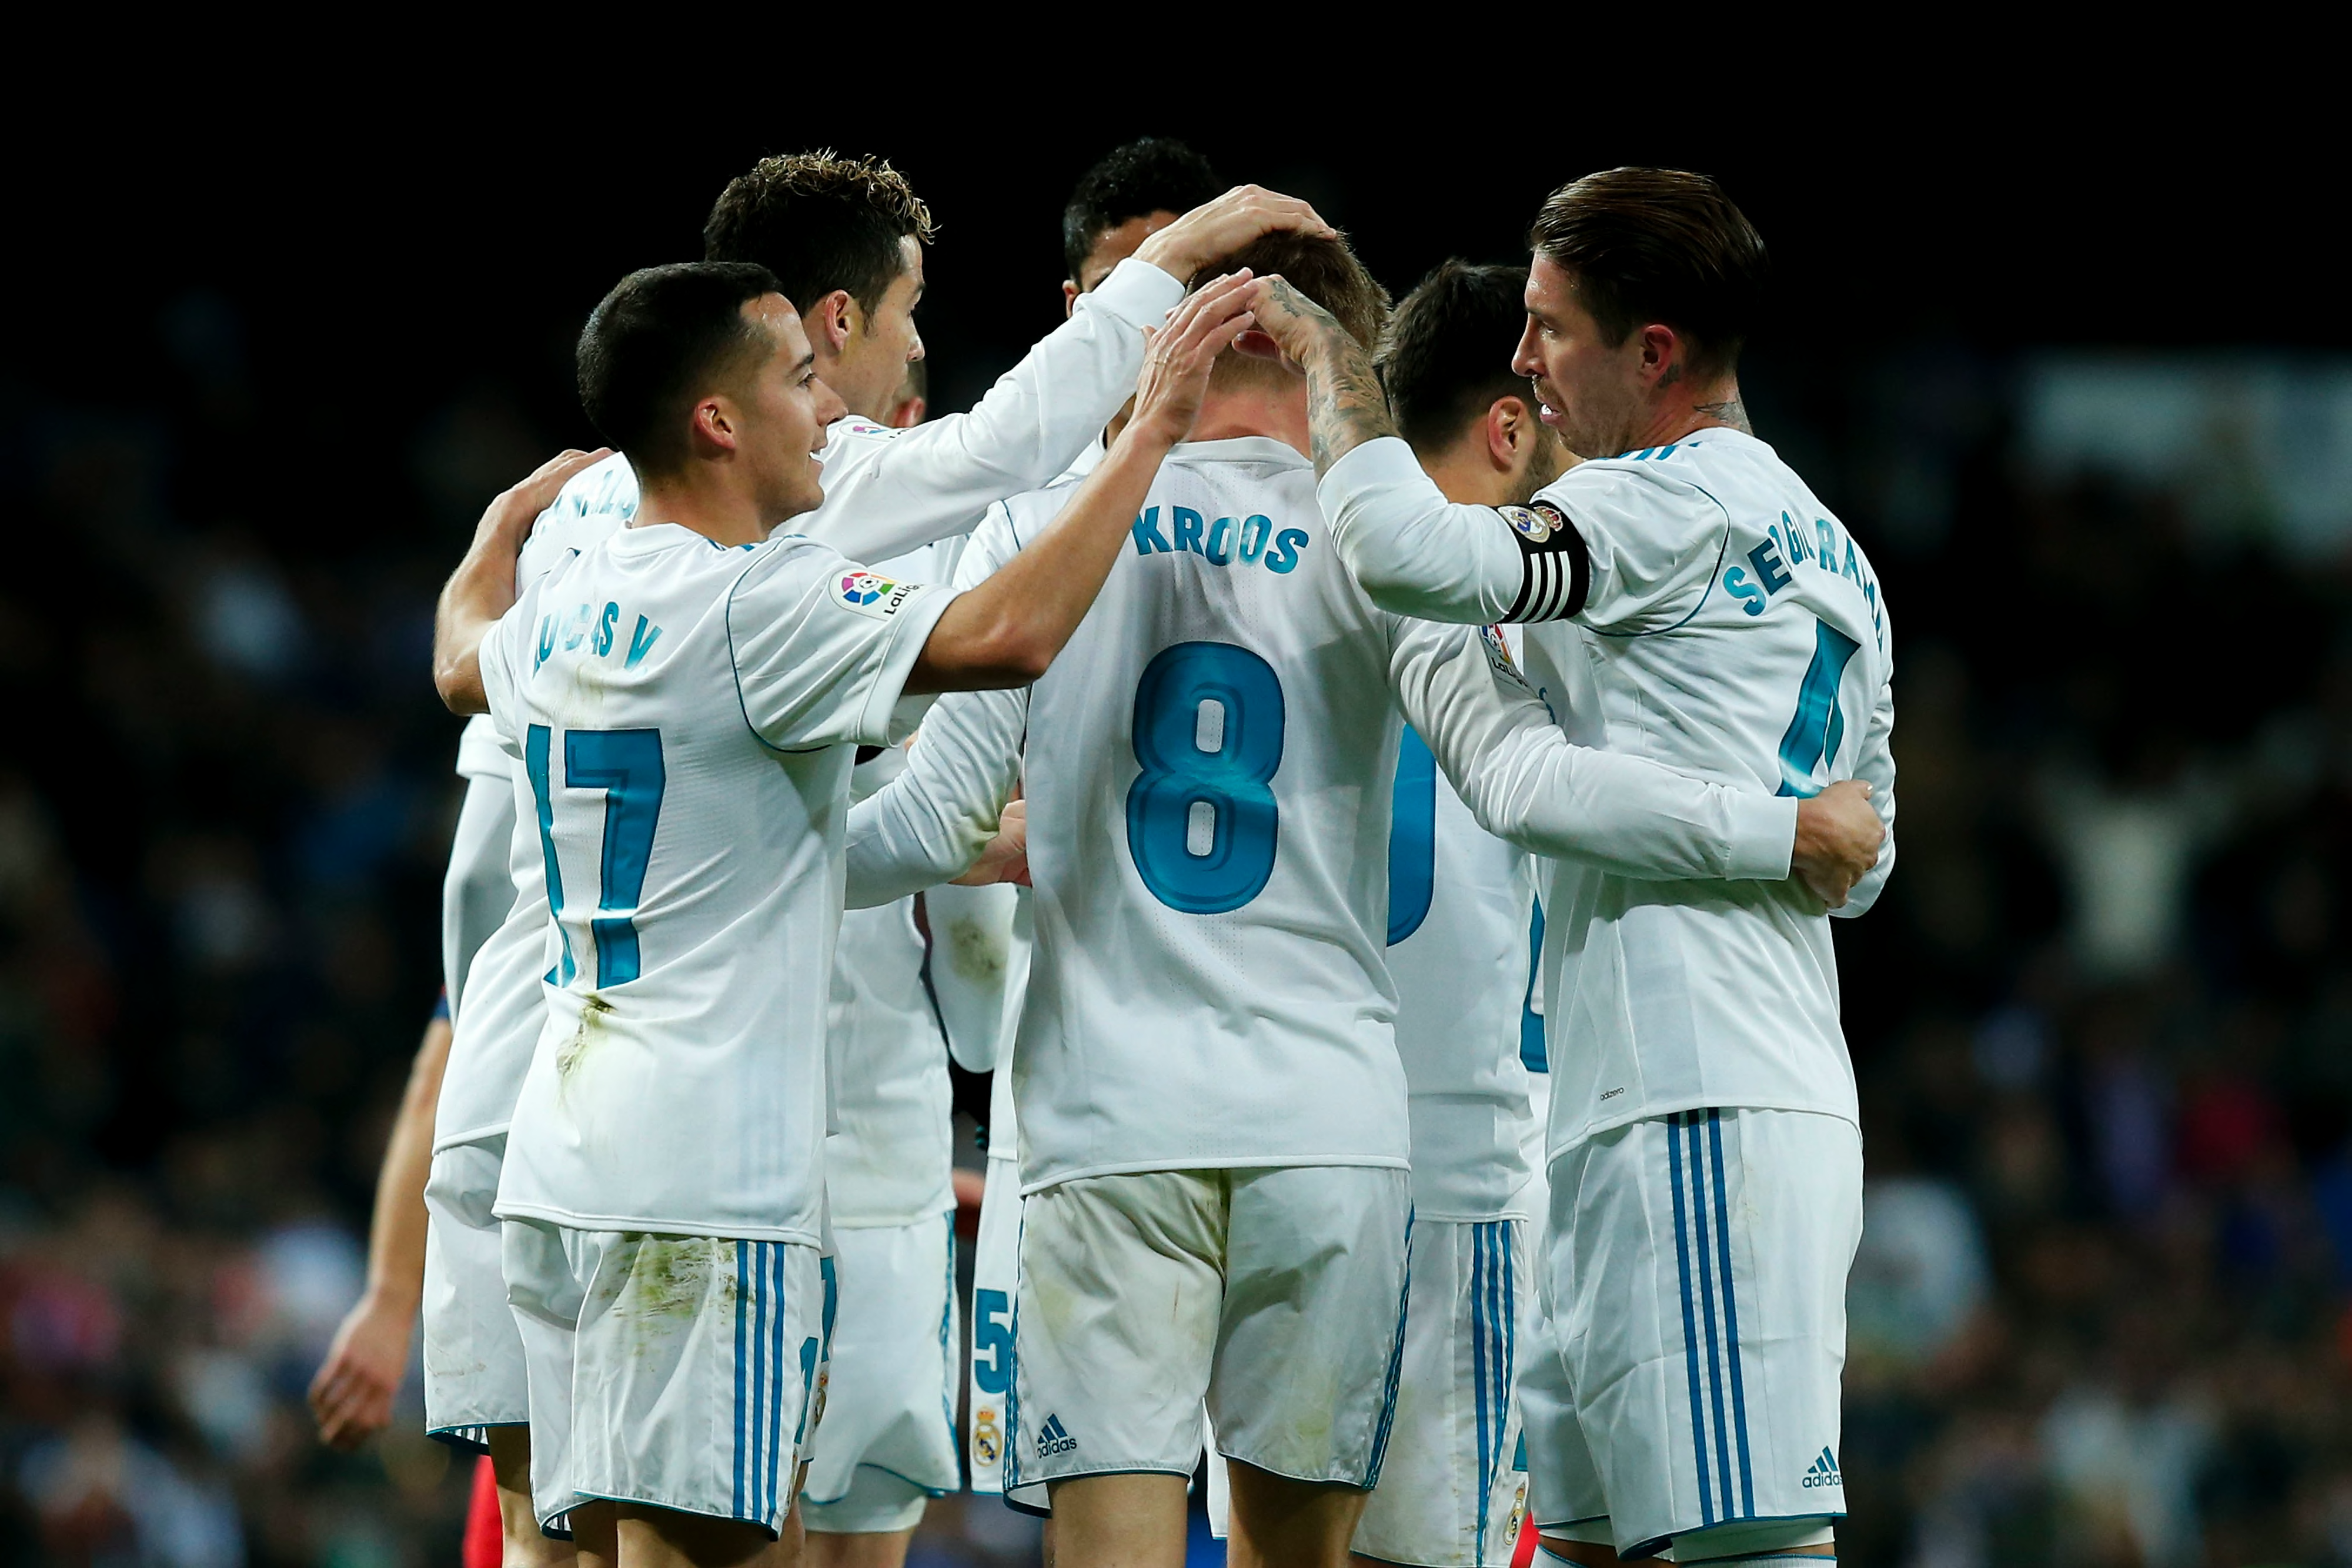 Real Madrid vs Paris Saint Germain: Three things to watch out for